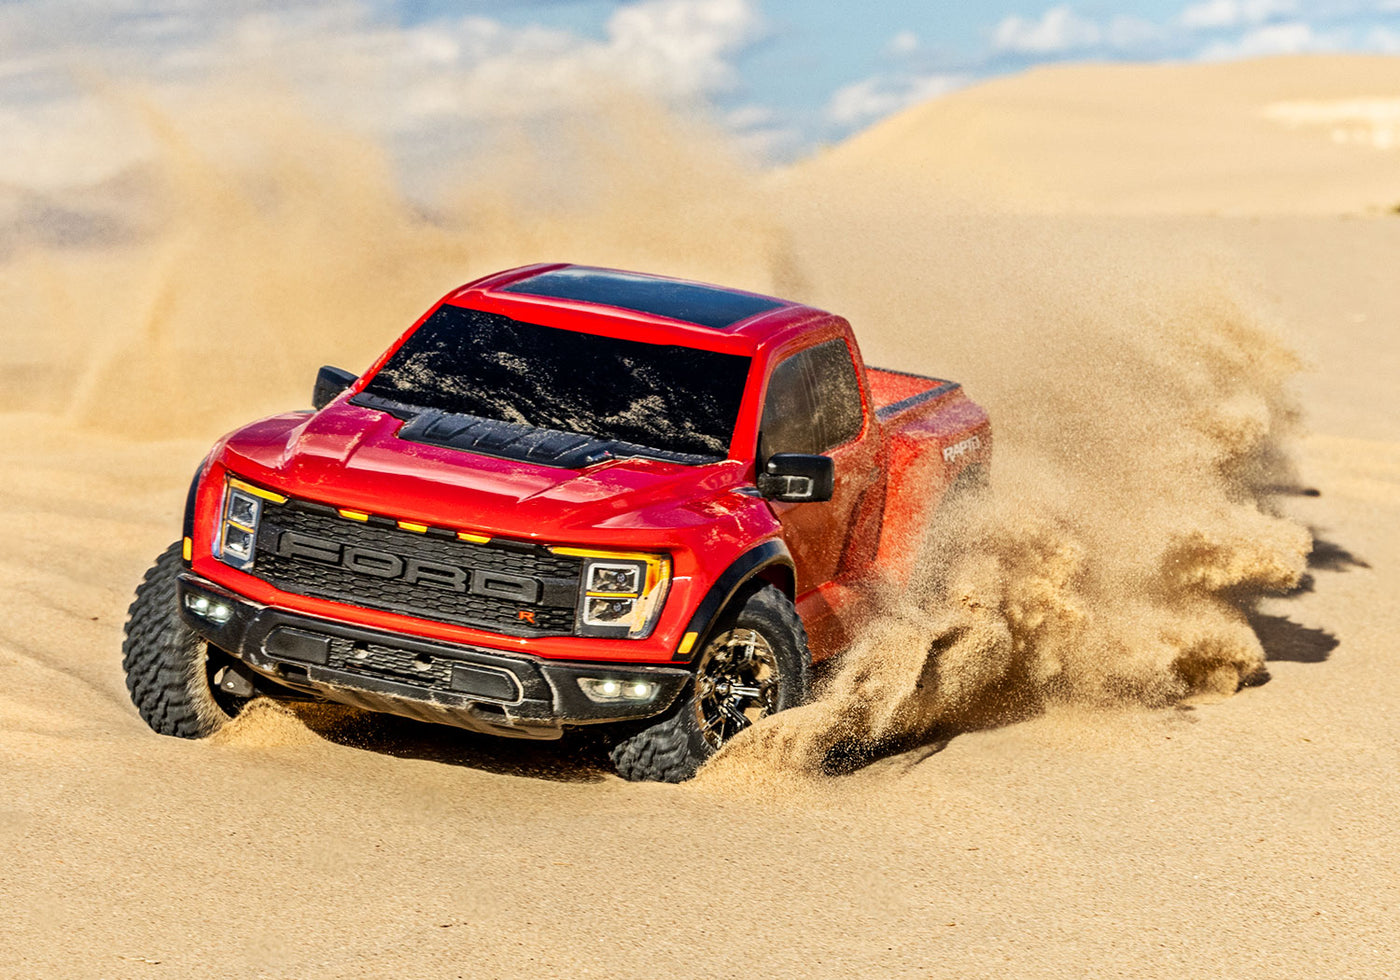 Ford® Raptor R™ 1/10 Pro Scale® 4WD Replica Truck Traxxas #101076-4 In-store pick-up only.